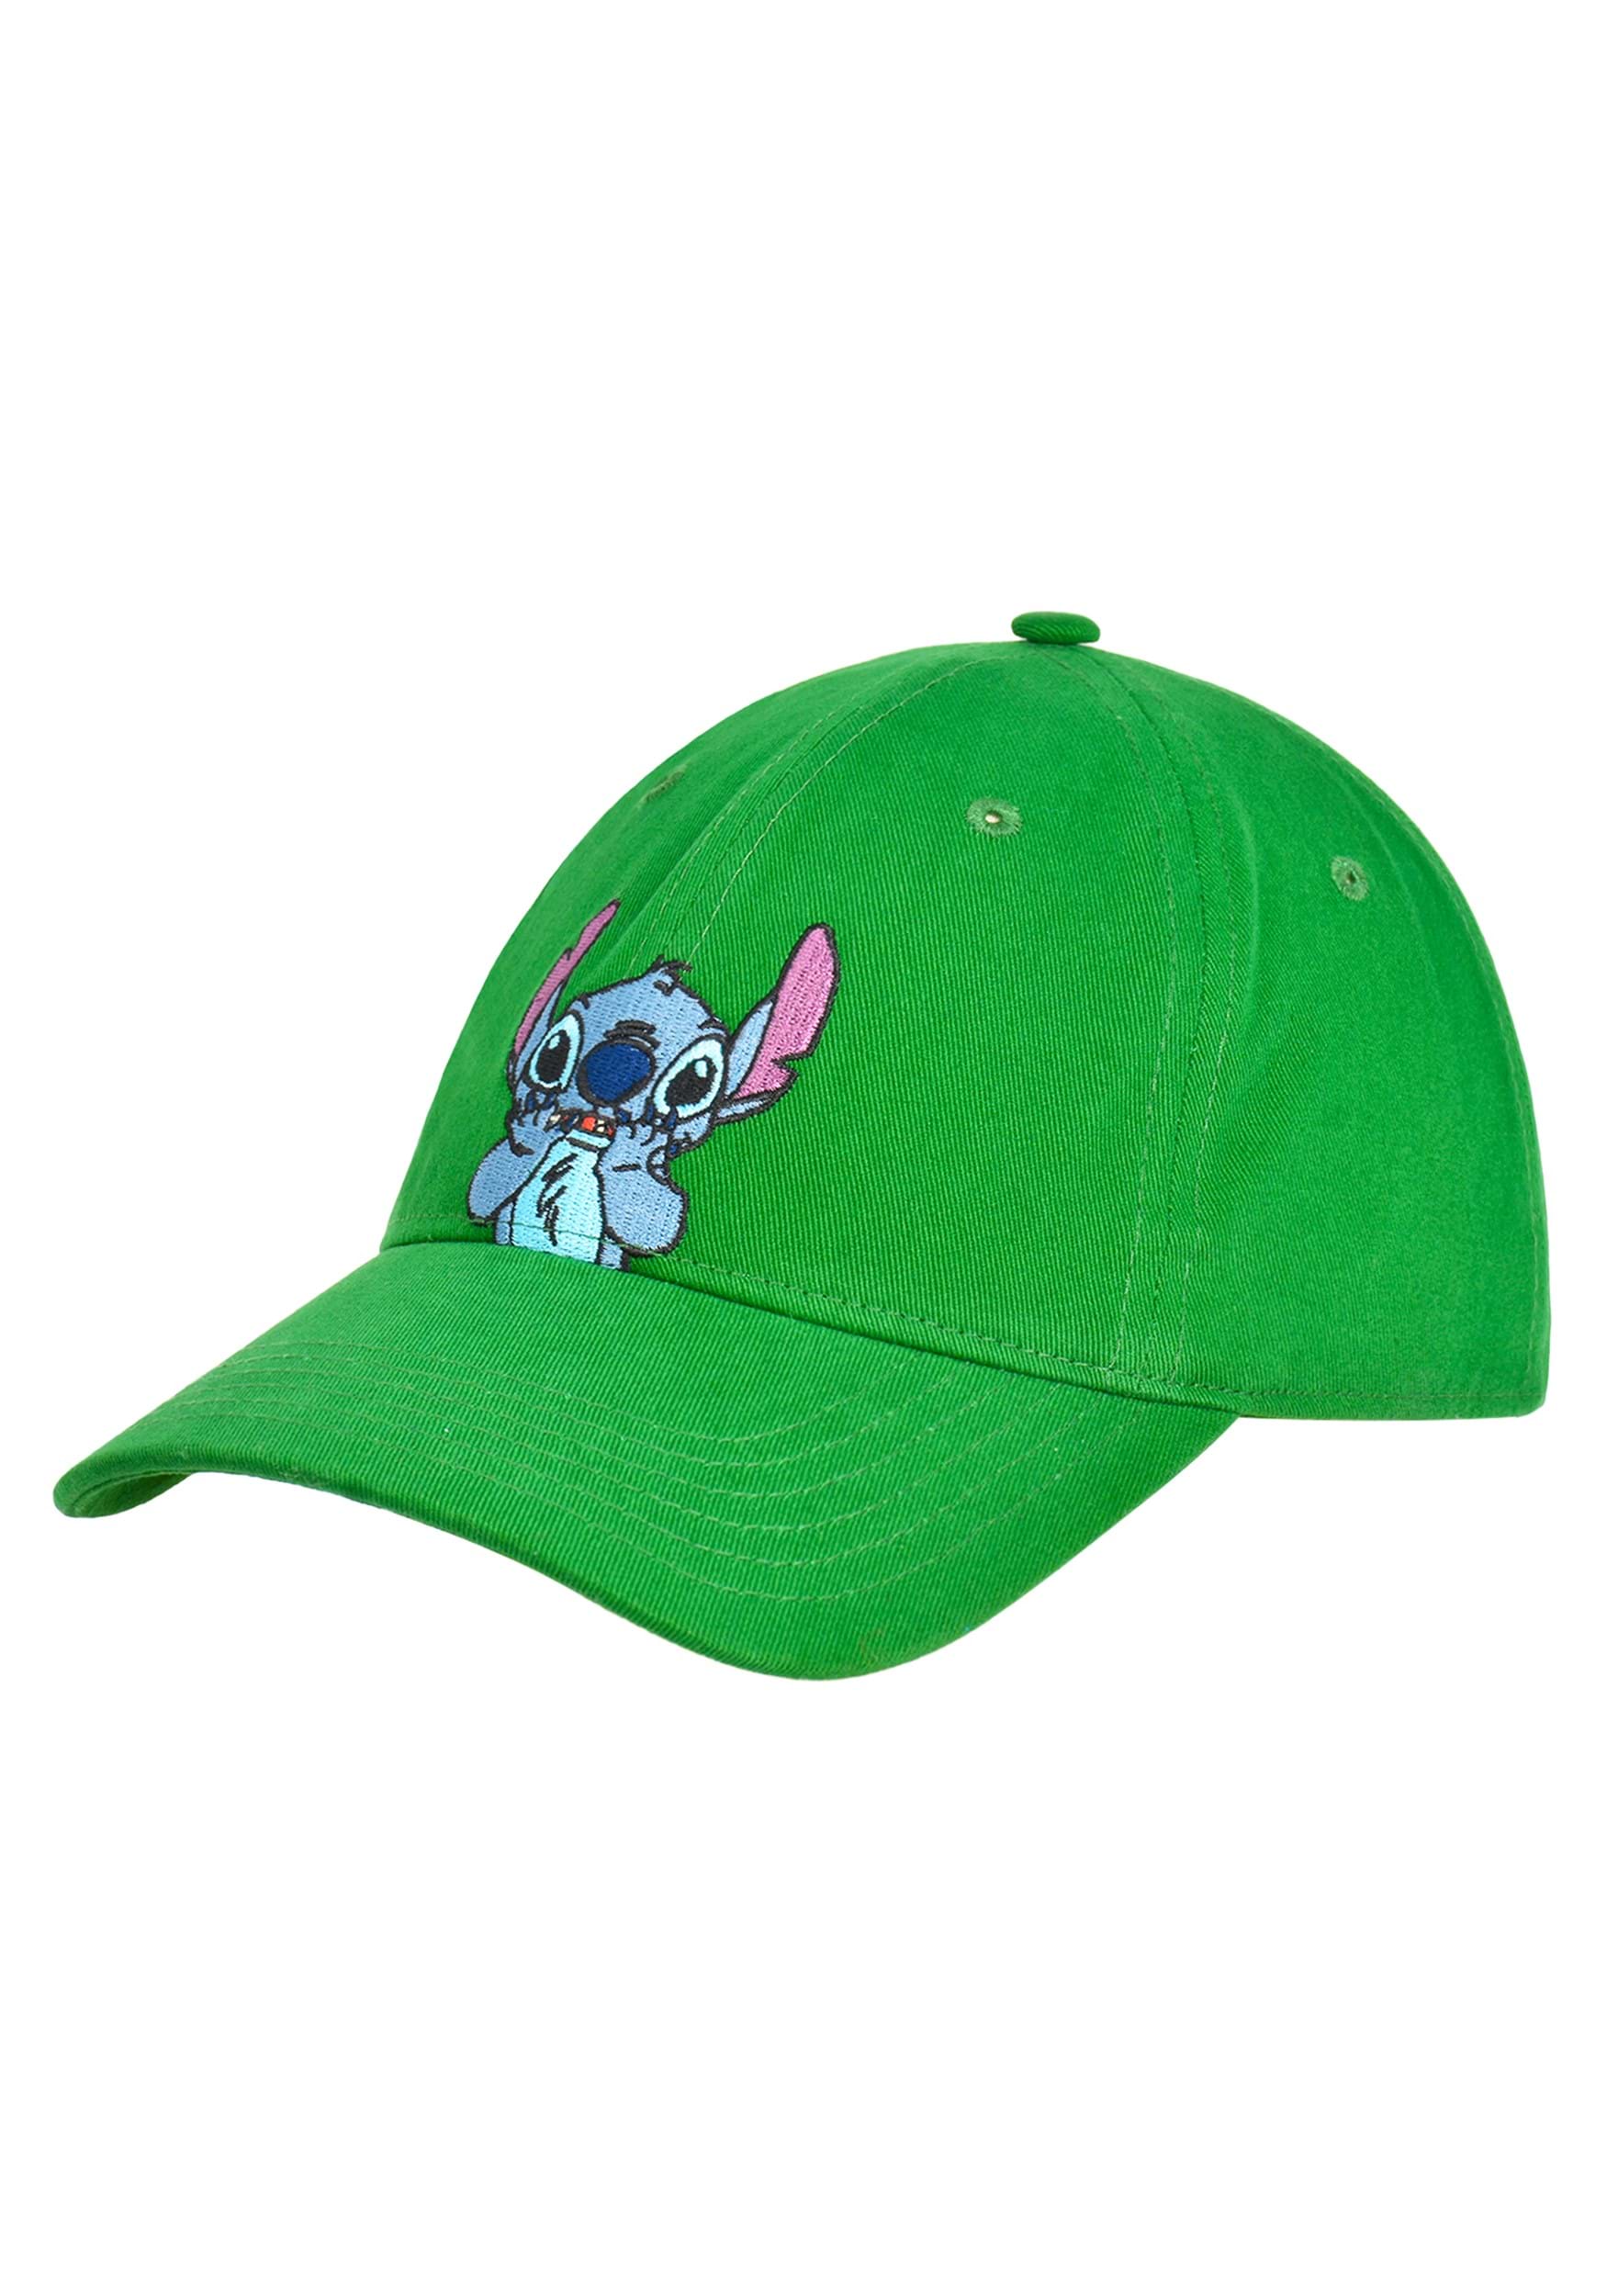 Stitch Hands On Face Peek-a-Boo Embroidered Dad Cap